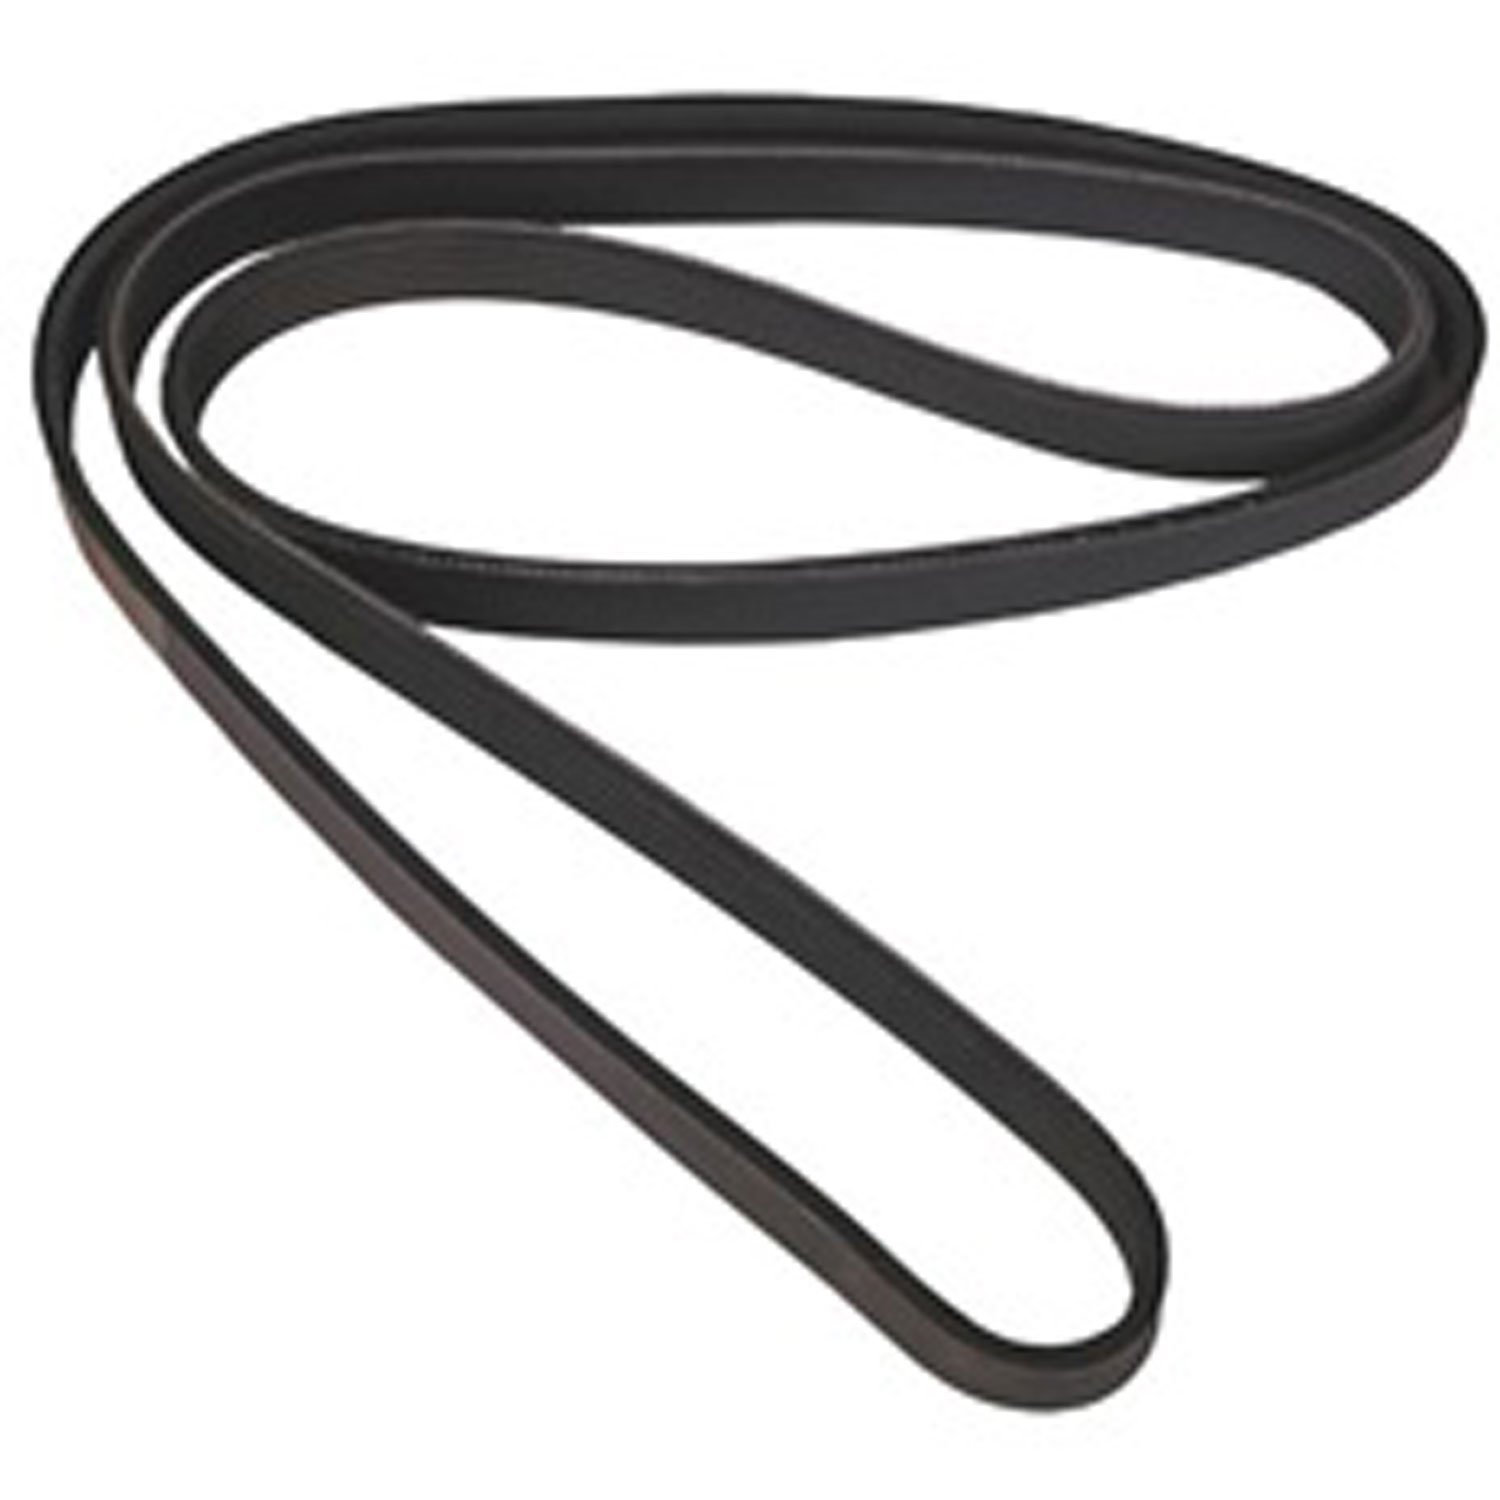 Replacement serpentine belt from Omix-ADA, Fits 07-11 Jeep Wrangler with 3.8 liter engine but without air conditioning.